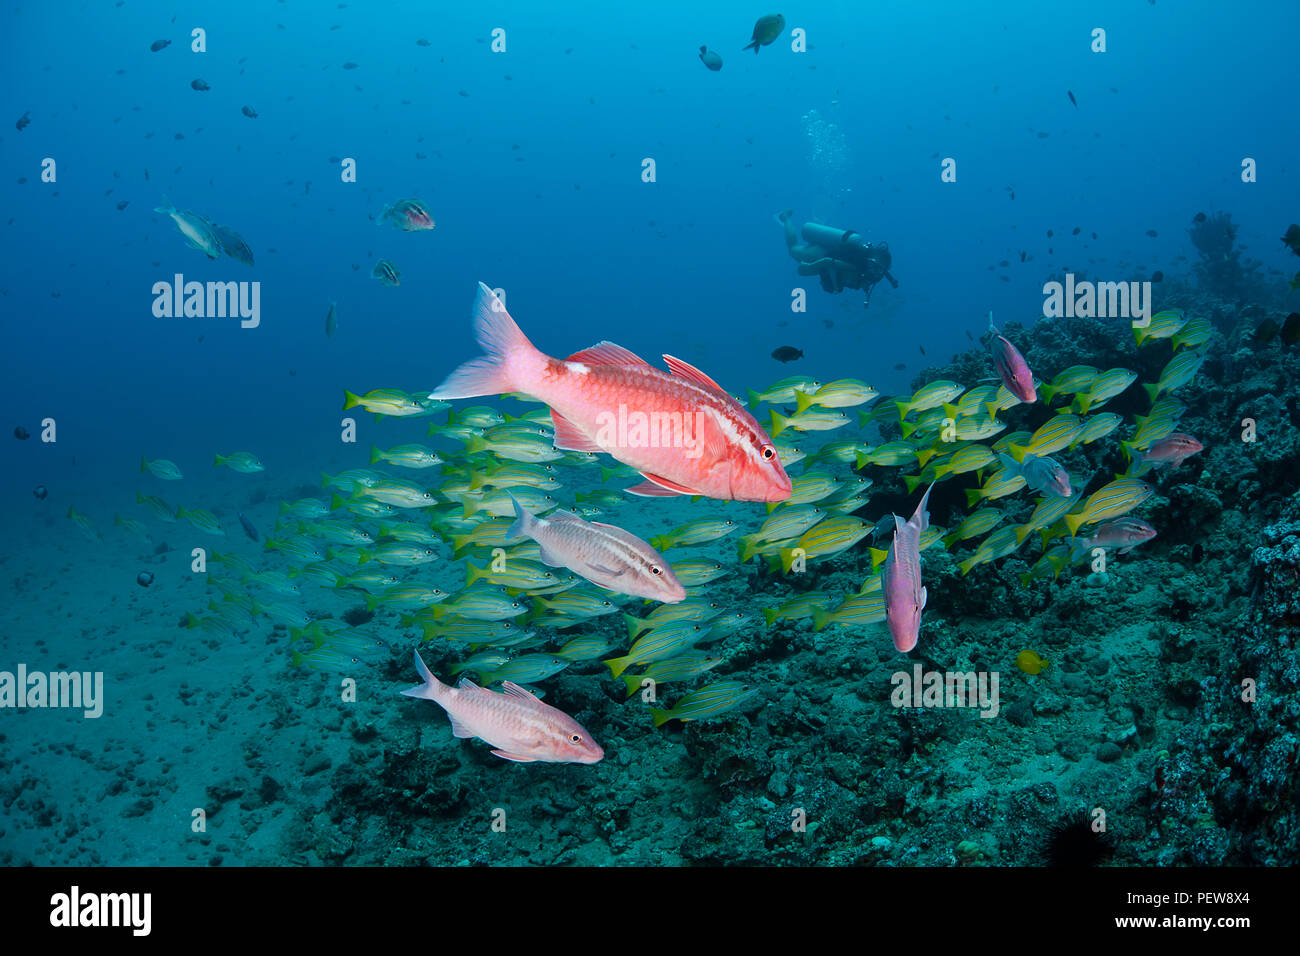 The whitesaddle goatfish, Parupeneus porphyreus, in the foreground is endemic to Hawaii.  Behind the goatfish are a school of bluestriped snapper, Mau Stock Photo